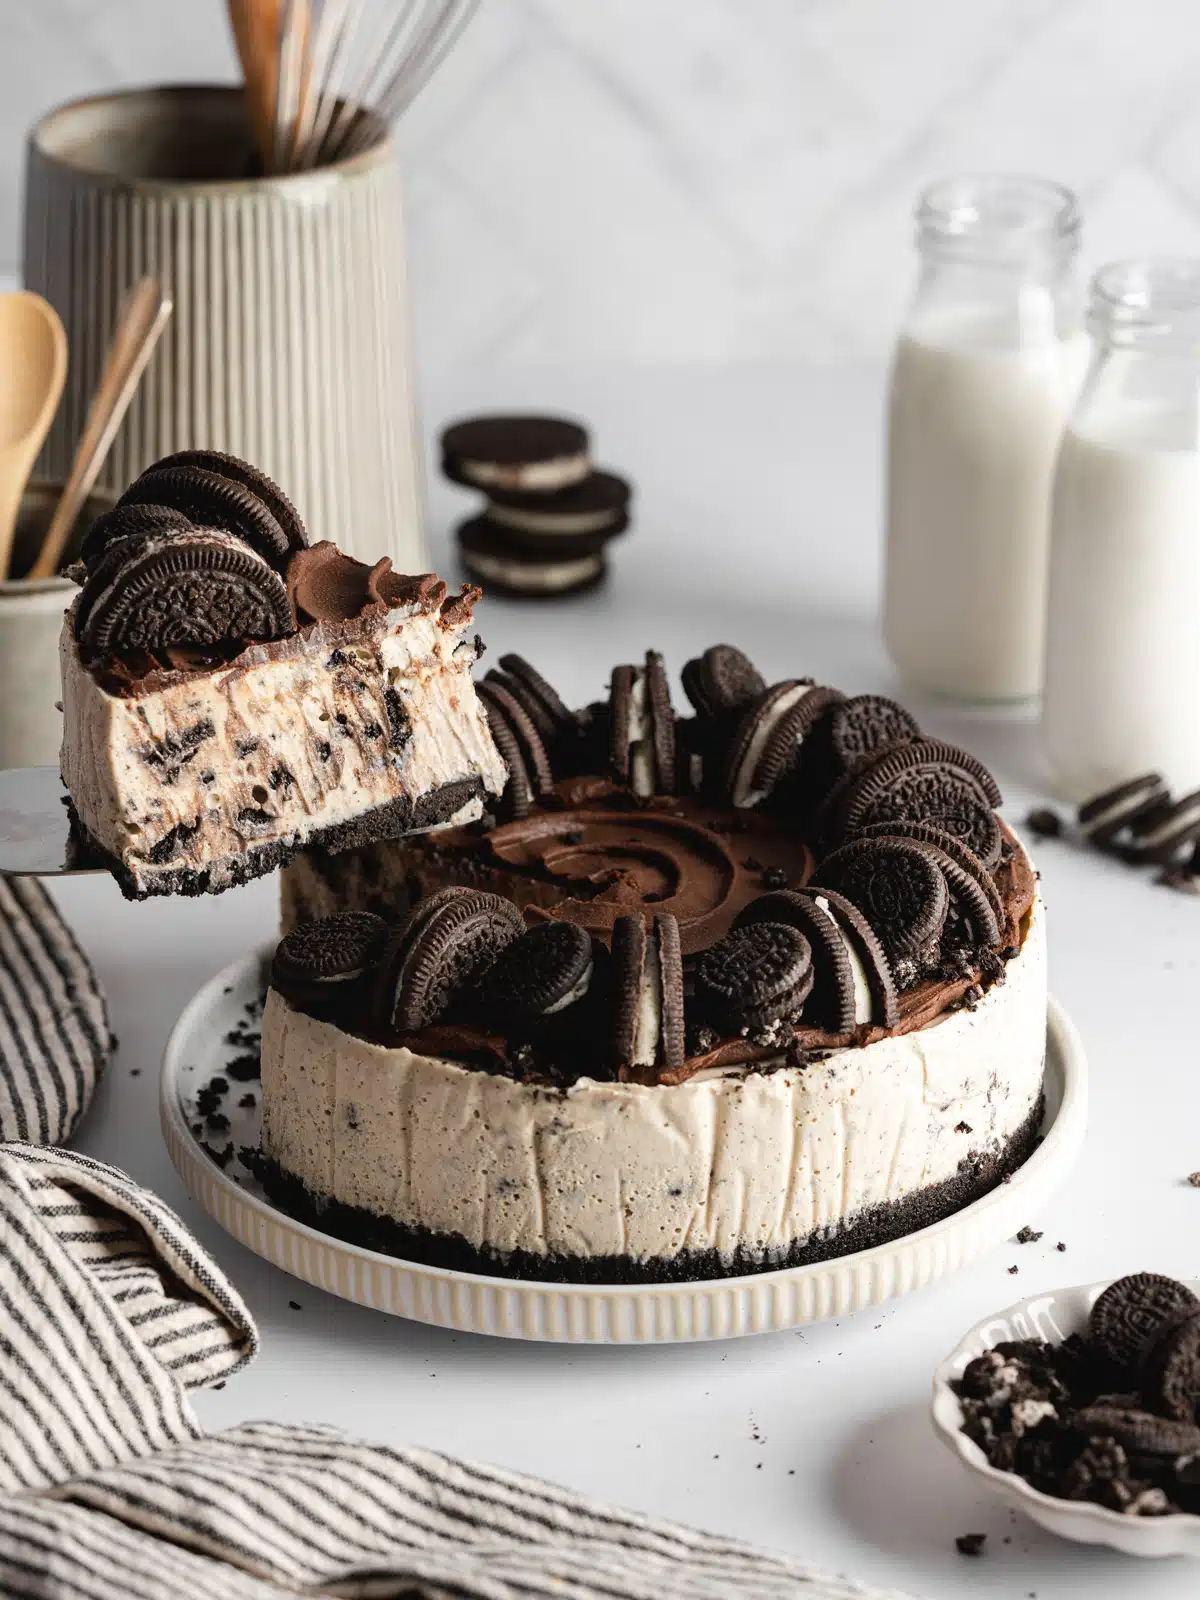 a full oreo cheesecake with a slice being lifted away on a cake slice, showing the creamy interior.